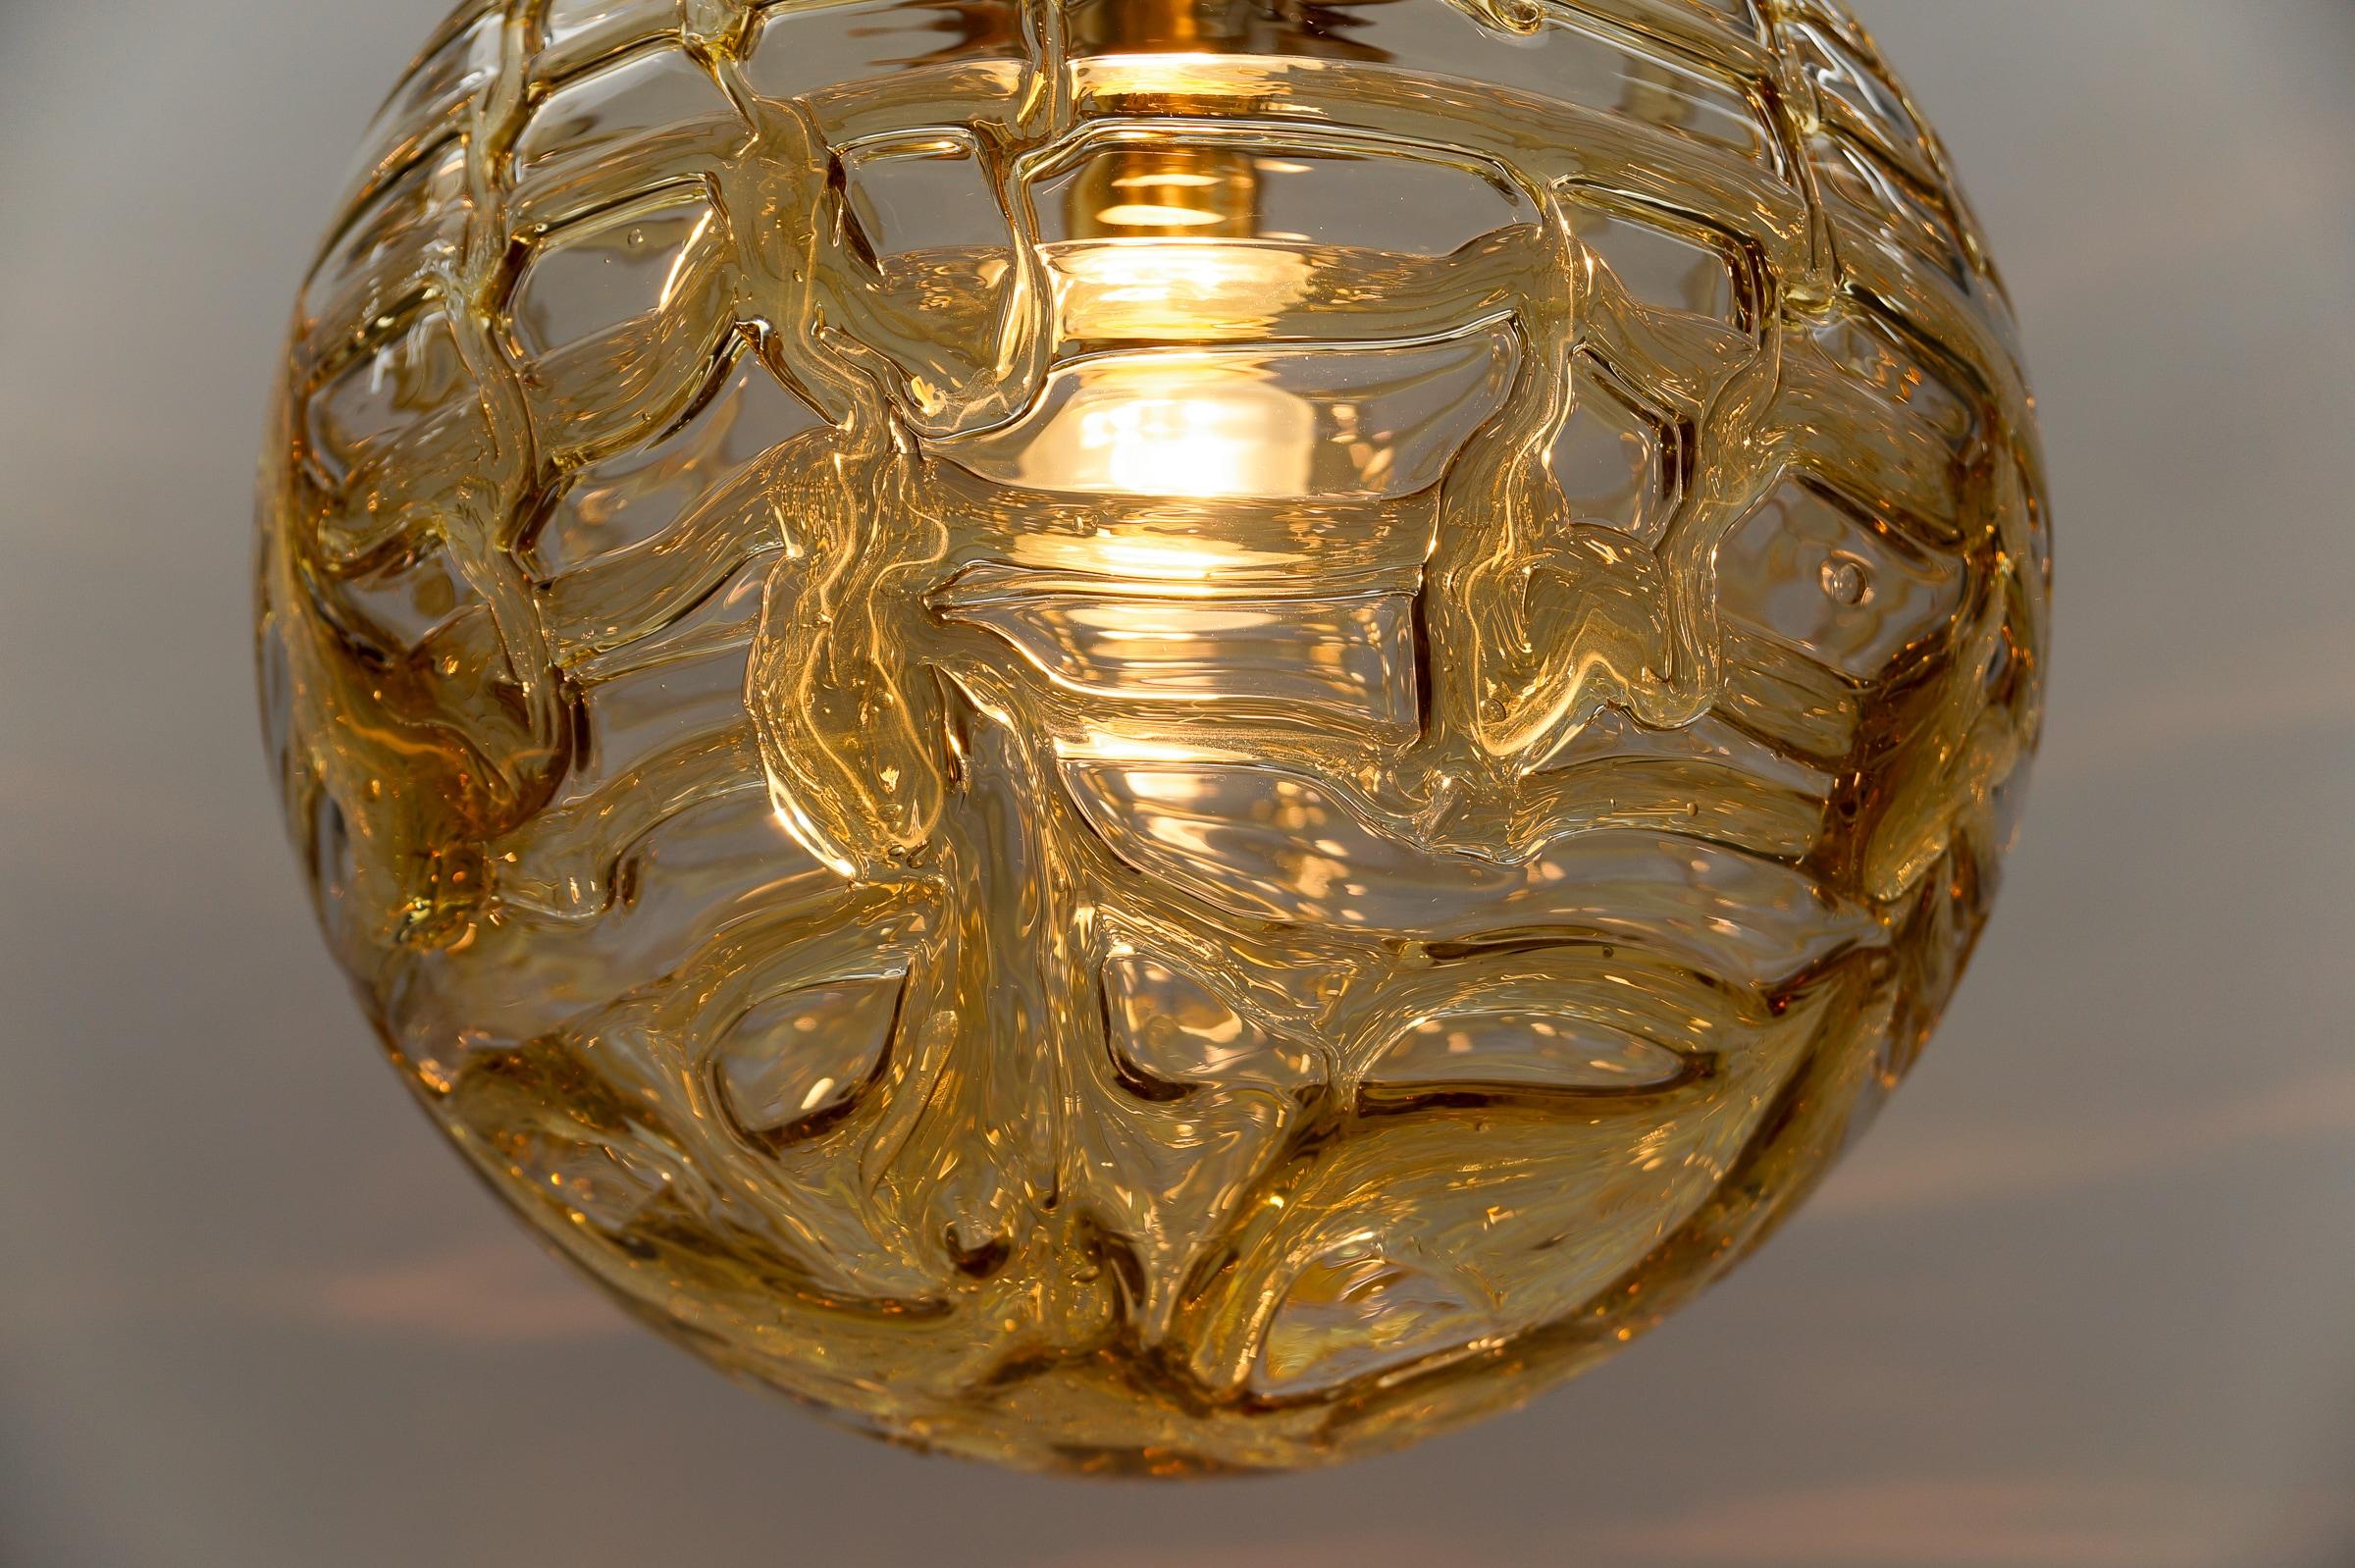 Lovely Yellow Murano Glass Ball Pendant Lamp by Doria, - 1960s Germany For Sale 4